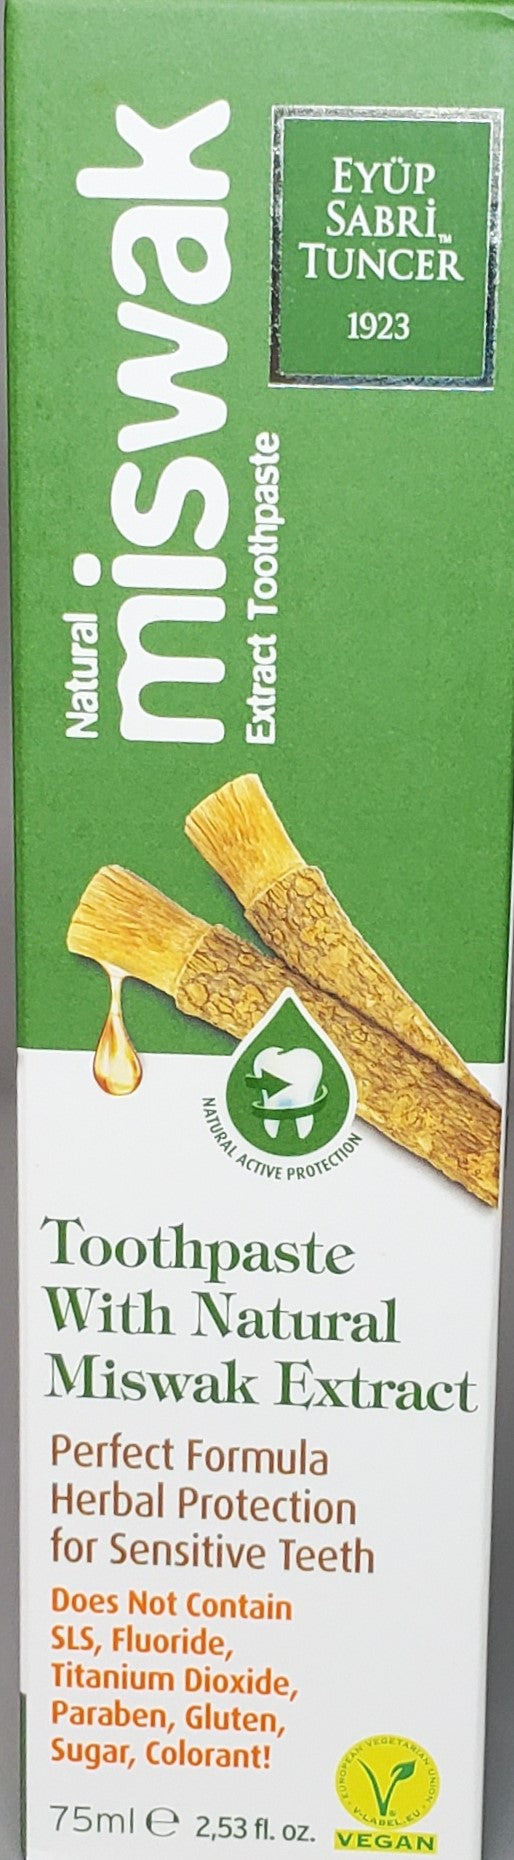 Eyüp Sabri Tuncer - Natural Miswak Extract Toothpaste 75 ml Perfect Formula Herbal Protection for Sensitive Teeth VEGAN (Does NOT include Toothbrush)